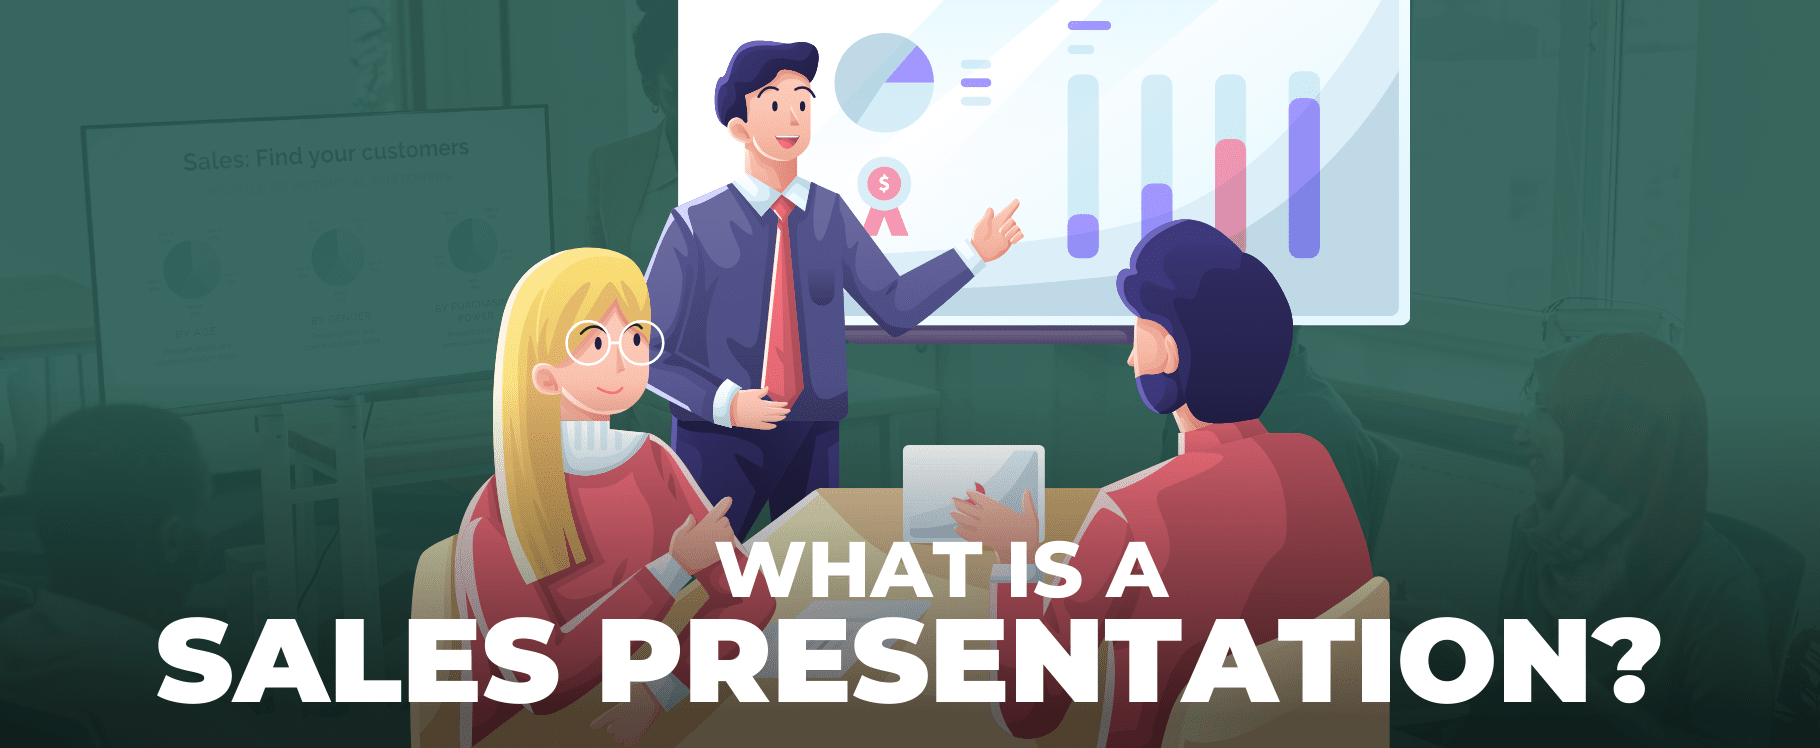 what is the meaning of sales presentation